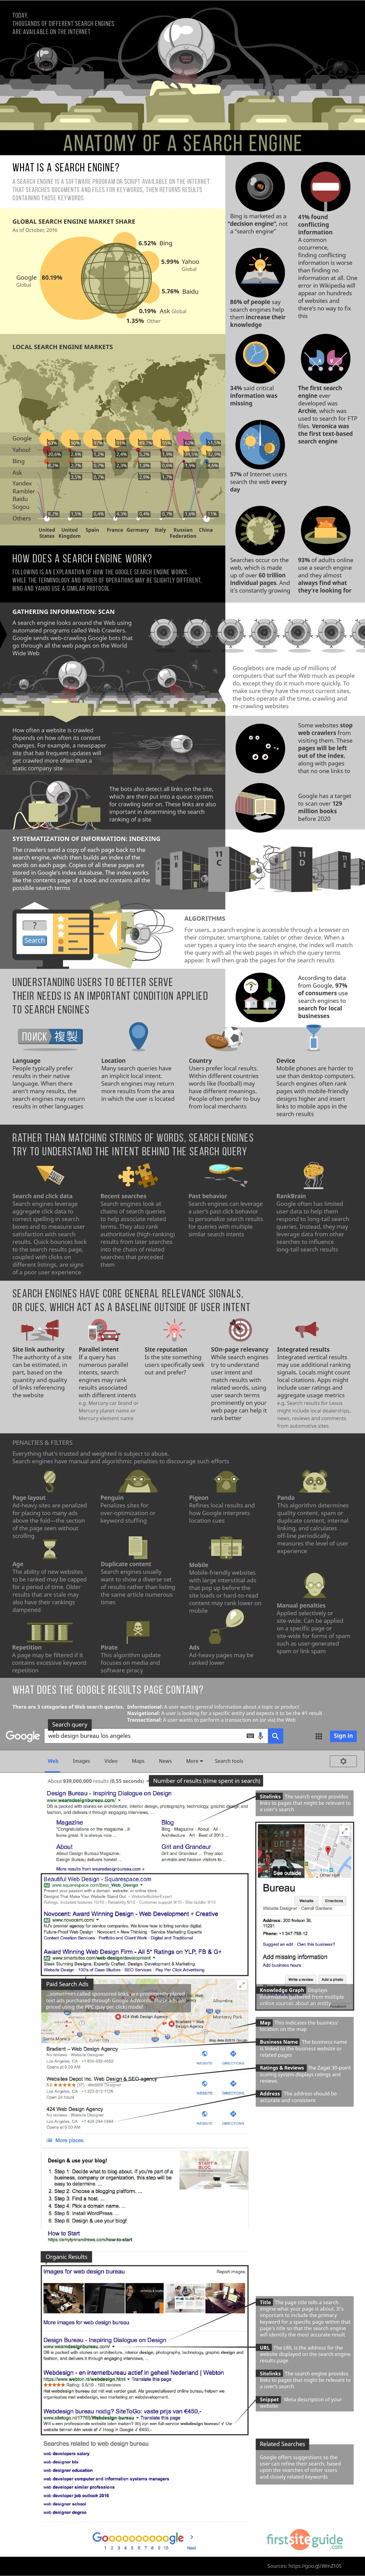 Anatomy of a Search Engine - #Infographic